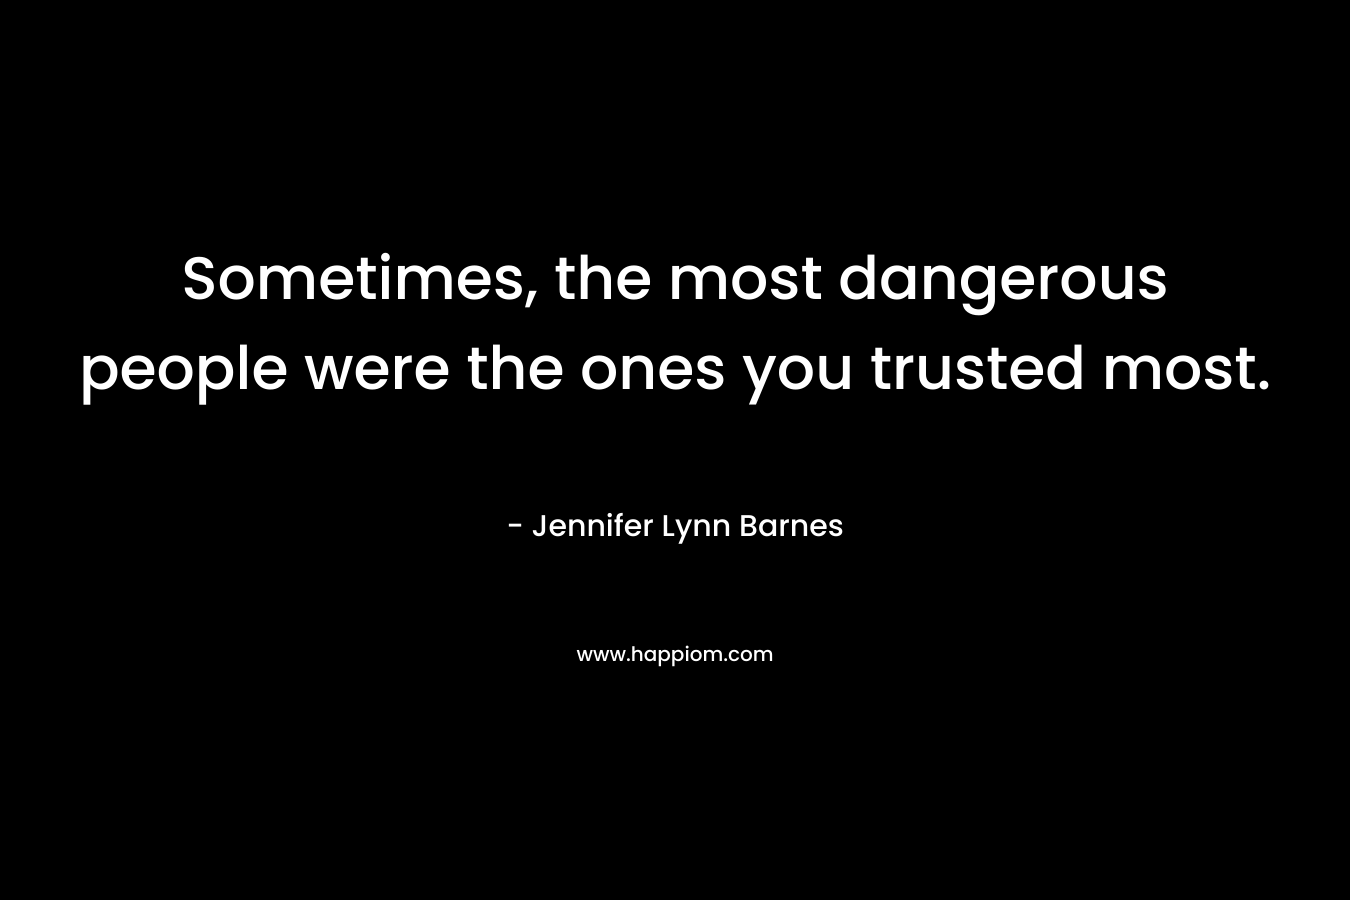 Sometimes, the most dangerous people were the ones you trusted most. – Jennifer Lynn Barnes